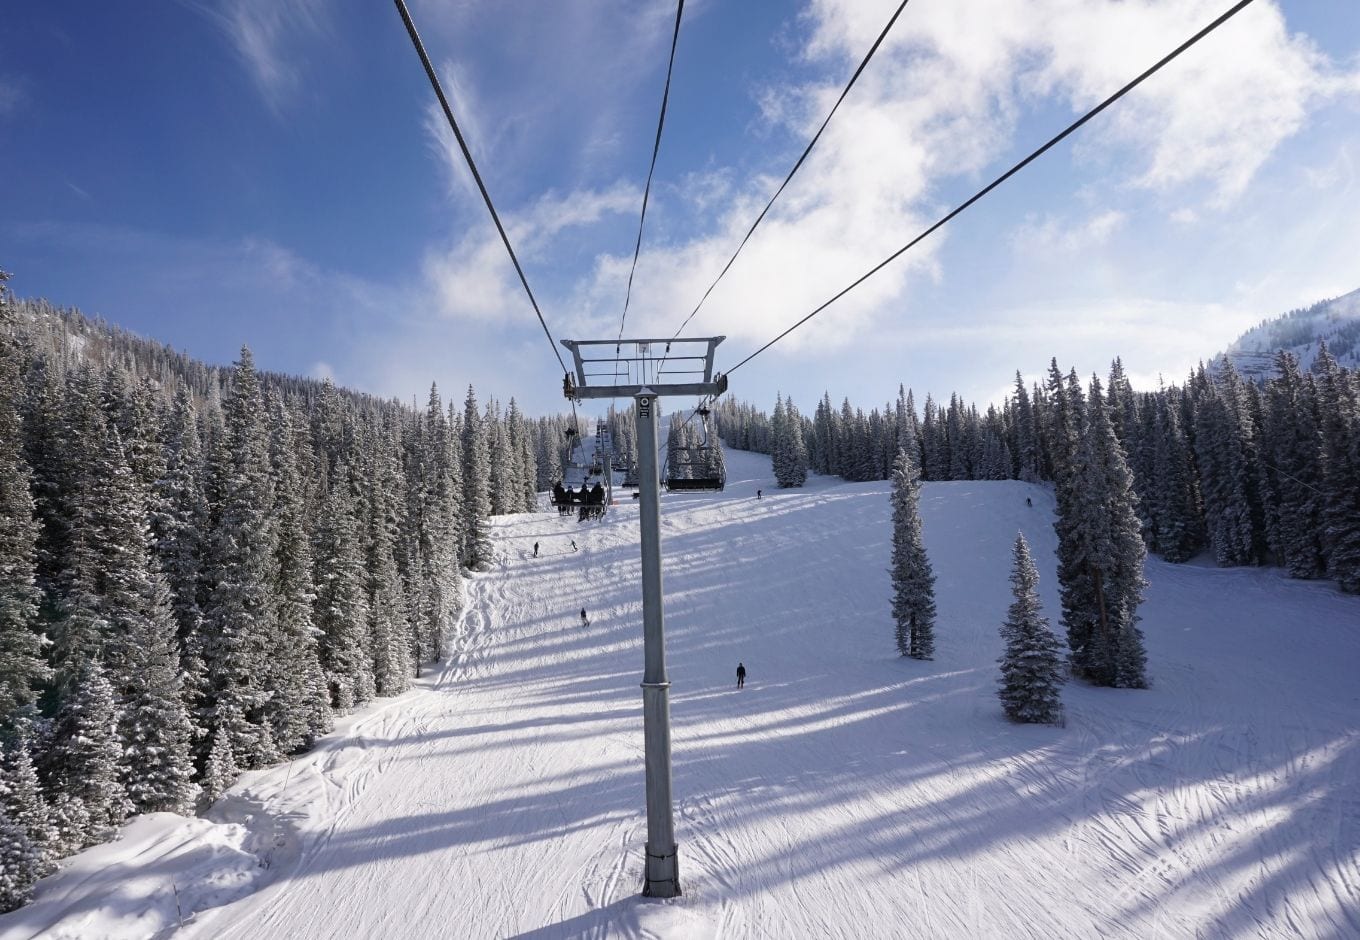 Ski lifts in the snowy mountains of Aspen Snowmass, Colorado.